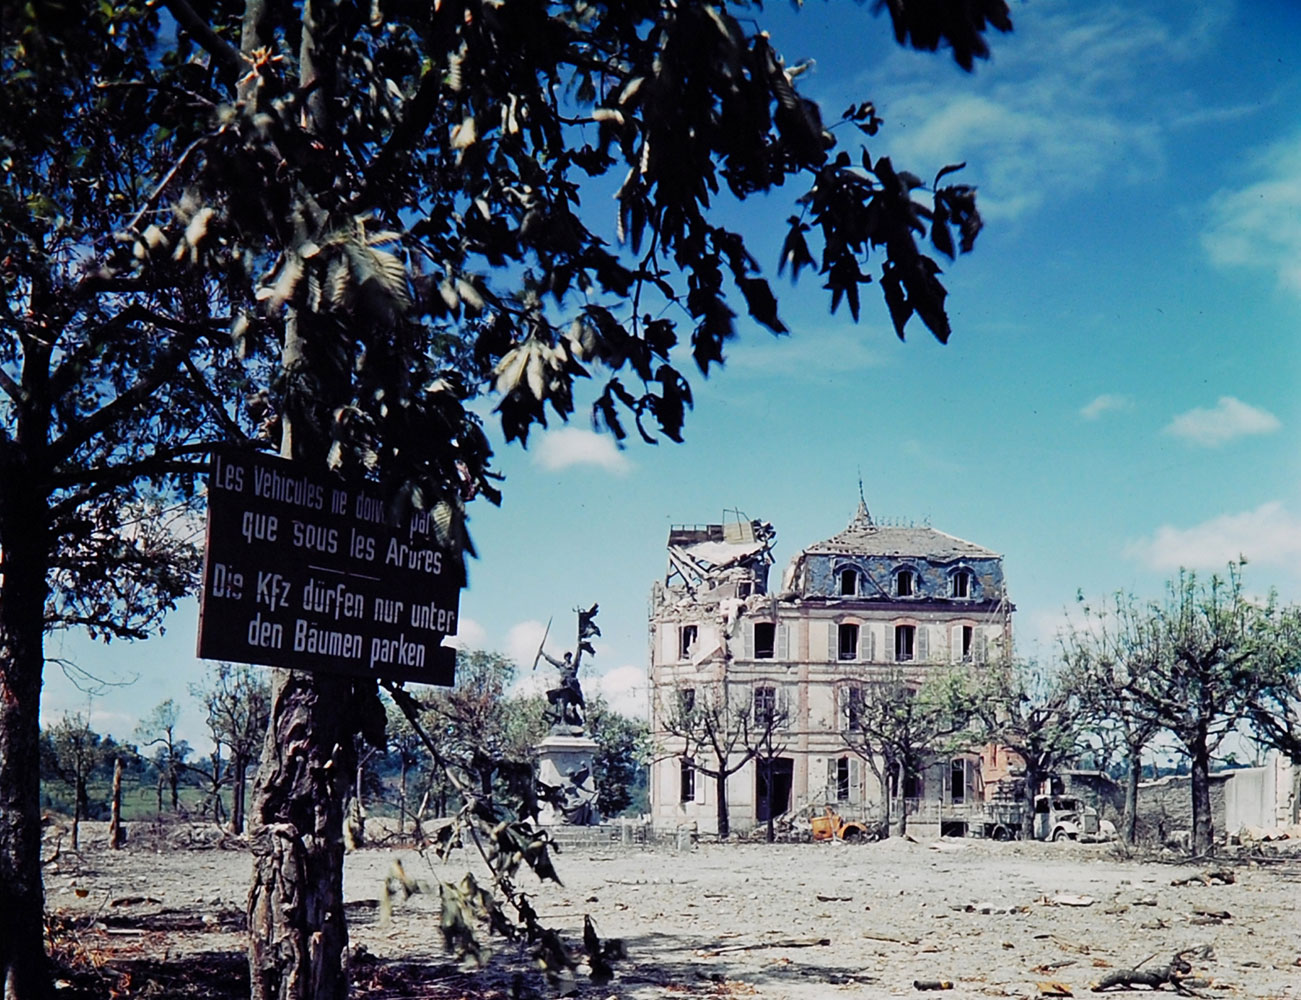 Ruined building and sign in French and German, northwestern France, summer 1944.